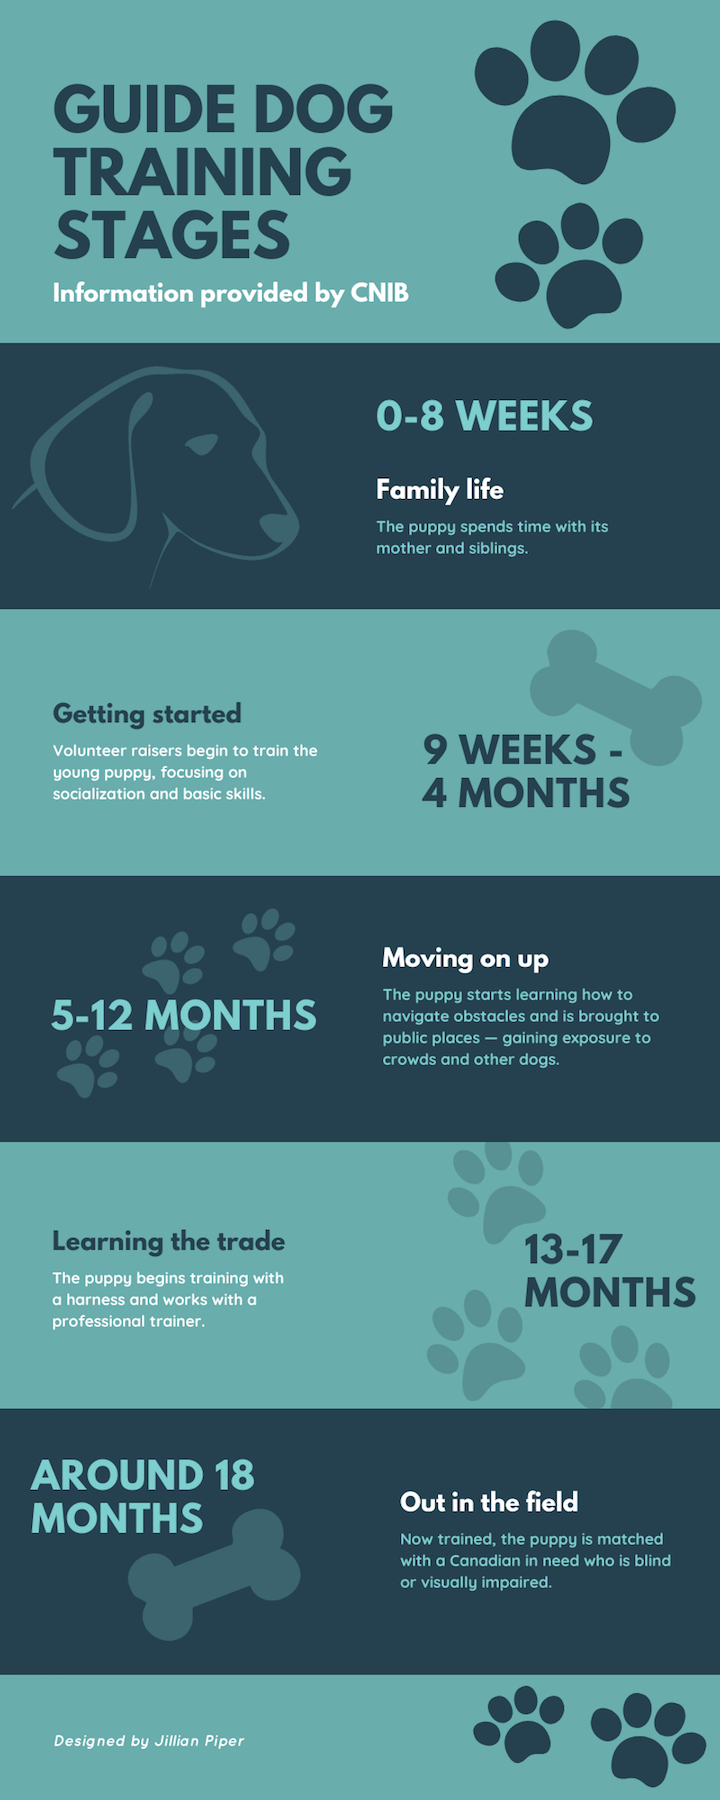 An infographic details guide dog training stages with information provided by CNIB. From zero to eight weeks old, the puppy spends time with its family. From nine weeks to four months, the puppy begins basic training with socialization. From five to 12 months, the puppy learns how to navigate obstacles and trains in public. By 13 to 17 months, the puppy is matched with a professional trainer who uses a harness. Starting at around 18 months, the puppy is matched with an eligible Canadian in need who is blind or visually impaired.